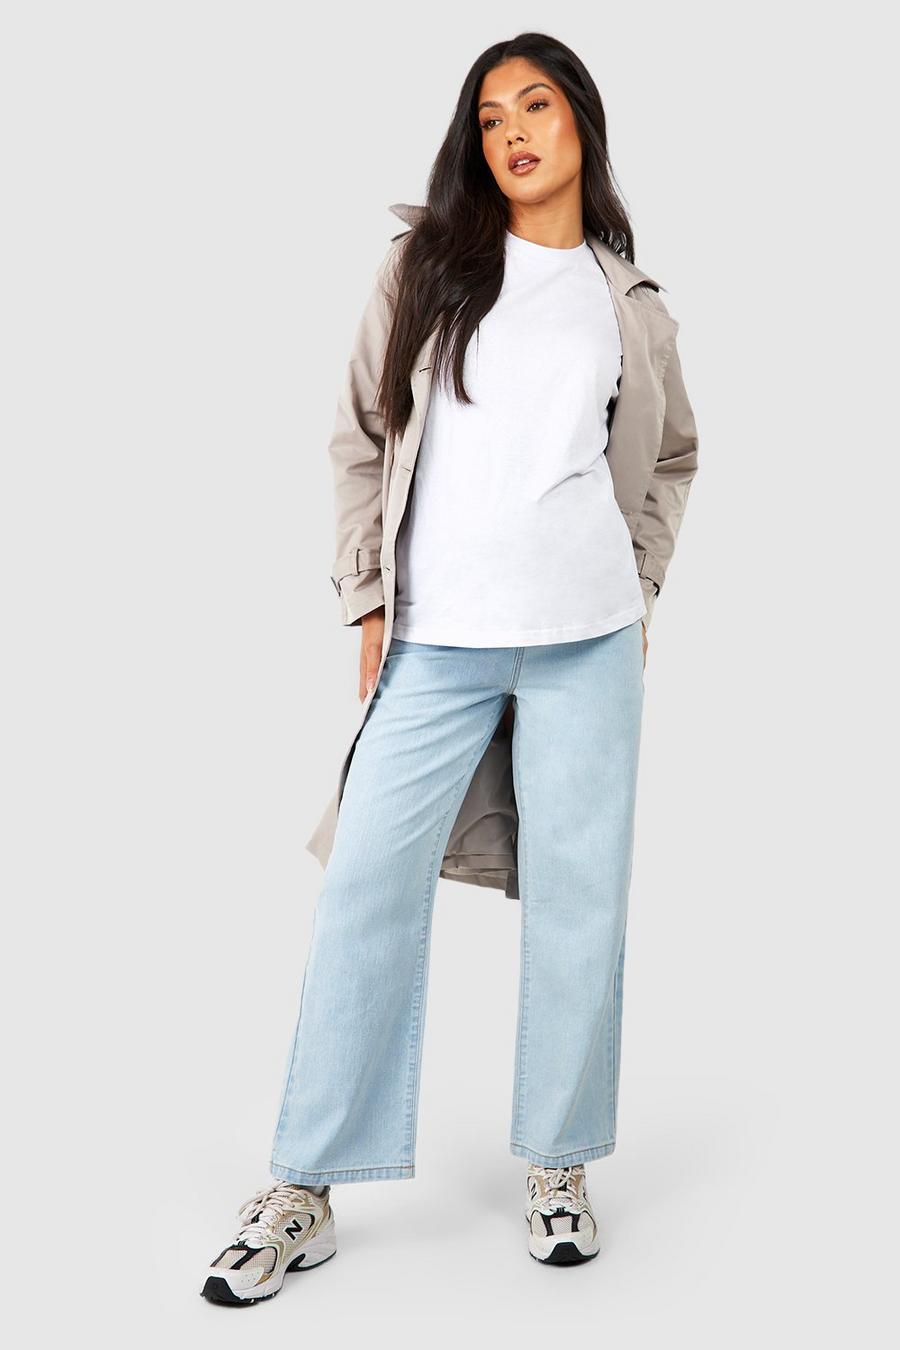 Maternity Over Bump Wide Leg Jeans